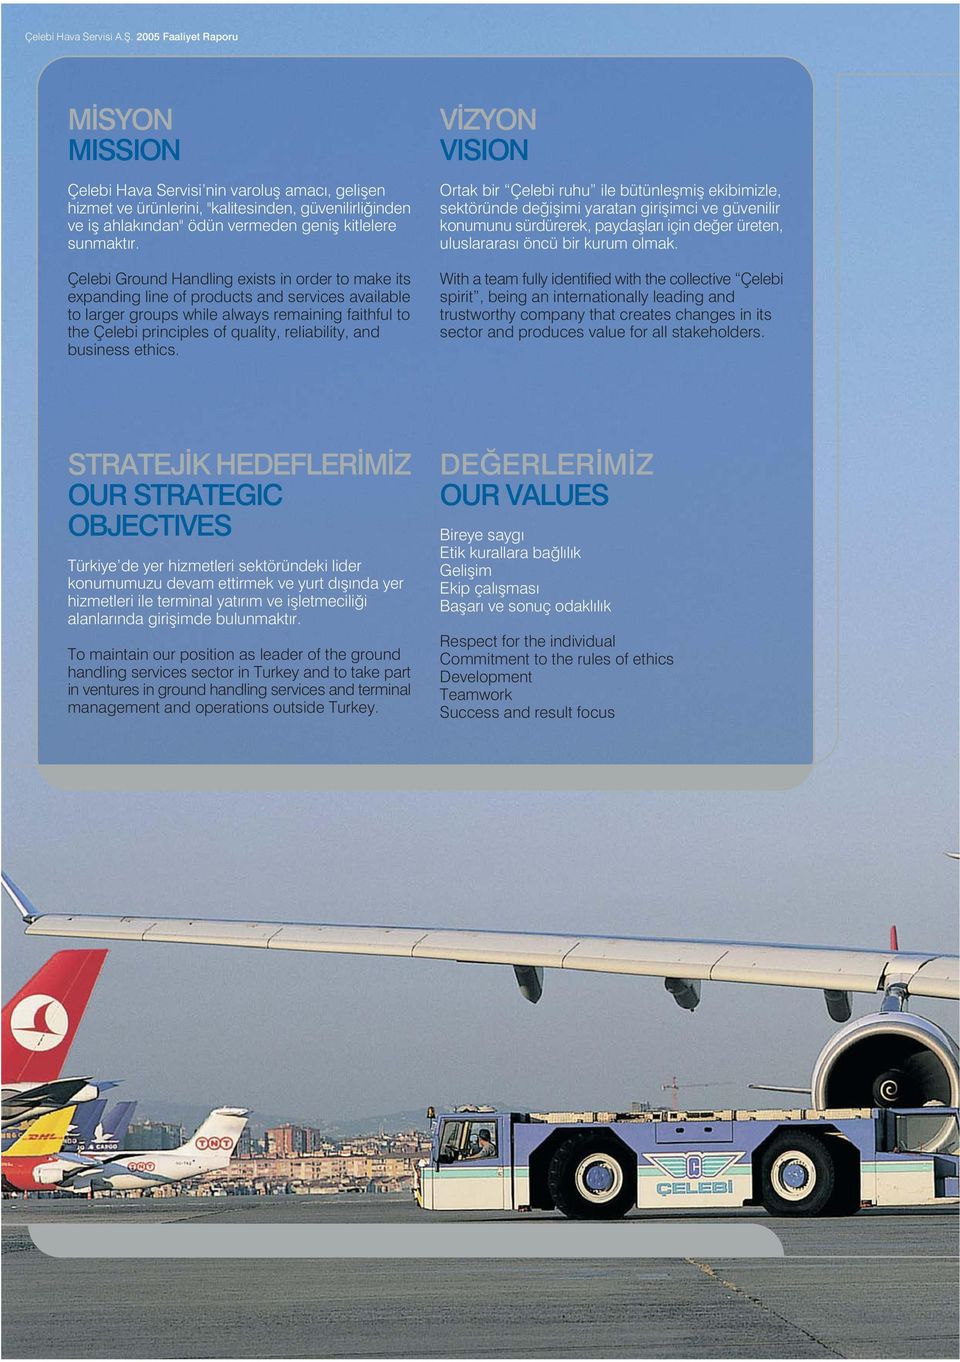 Çelebi Ground Handling exists in order to make its expanding line of products and services available to larger groups while always remaining faithful to the Çelebi principles of quality, reliability,